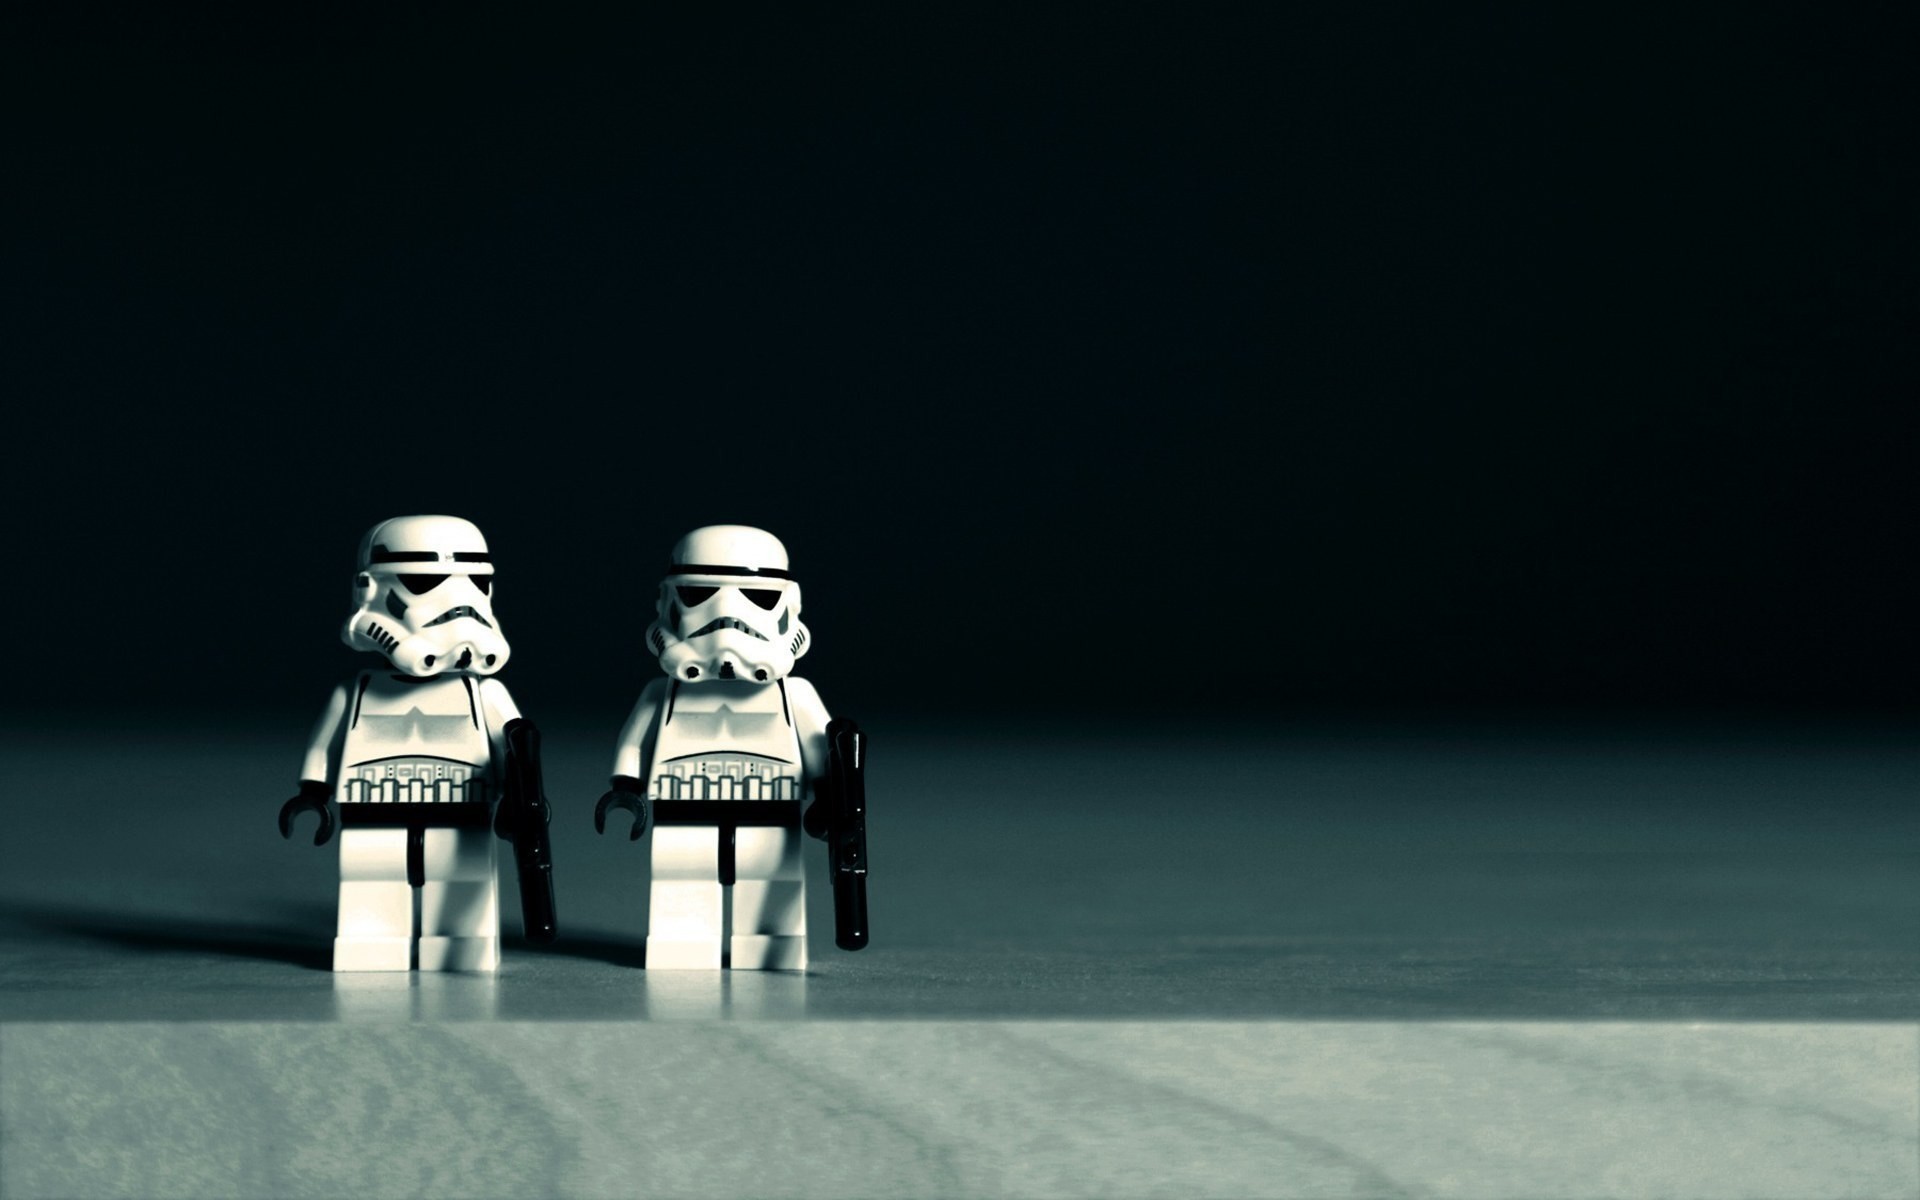 1920x1200 Image - Star-wars-stormtroopers-toys-macro-lego-hd-